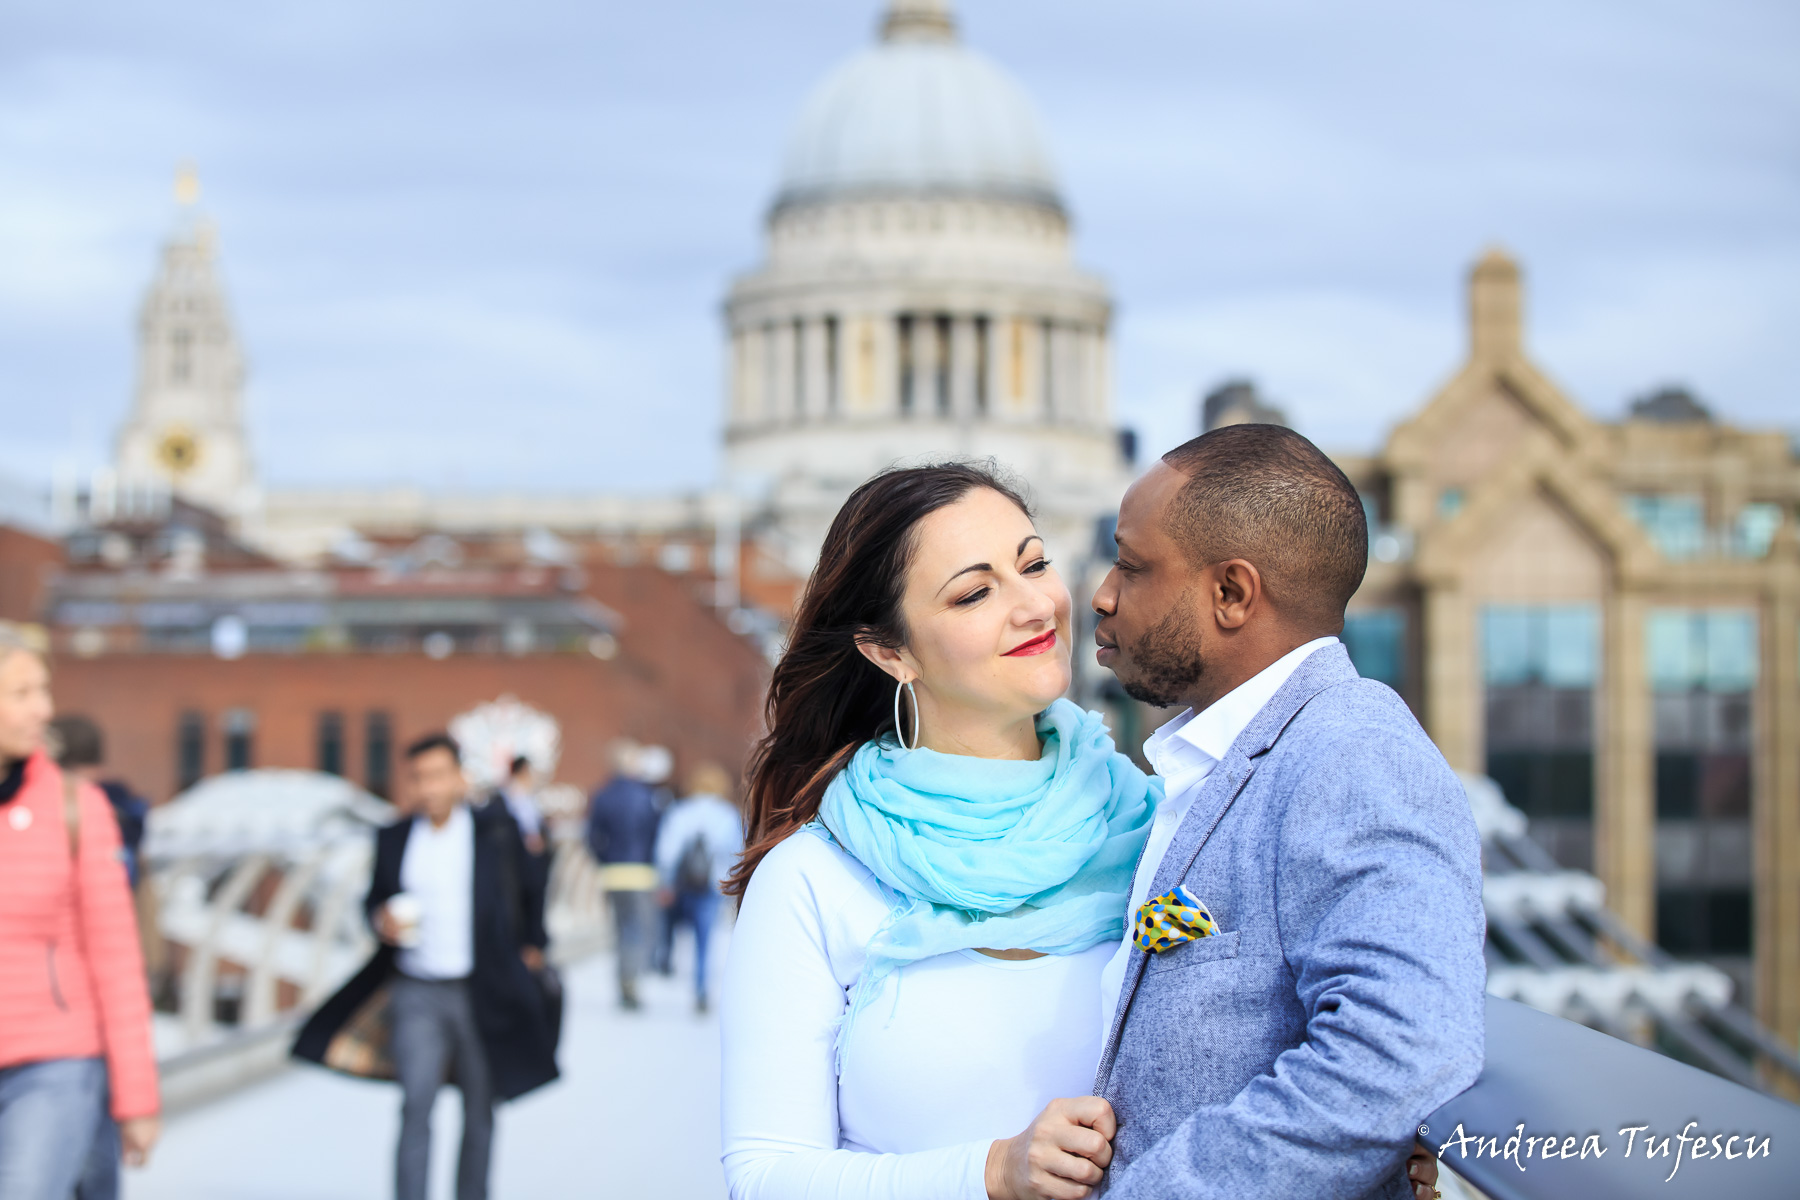  Dylan & Sandy Engagement Photoshoot Central London - images by Andreea Tufescu 